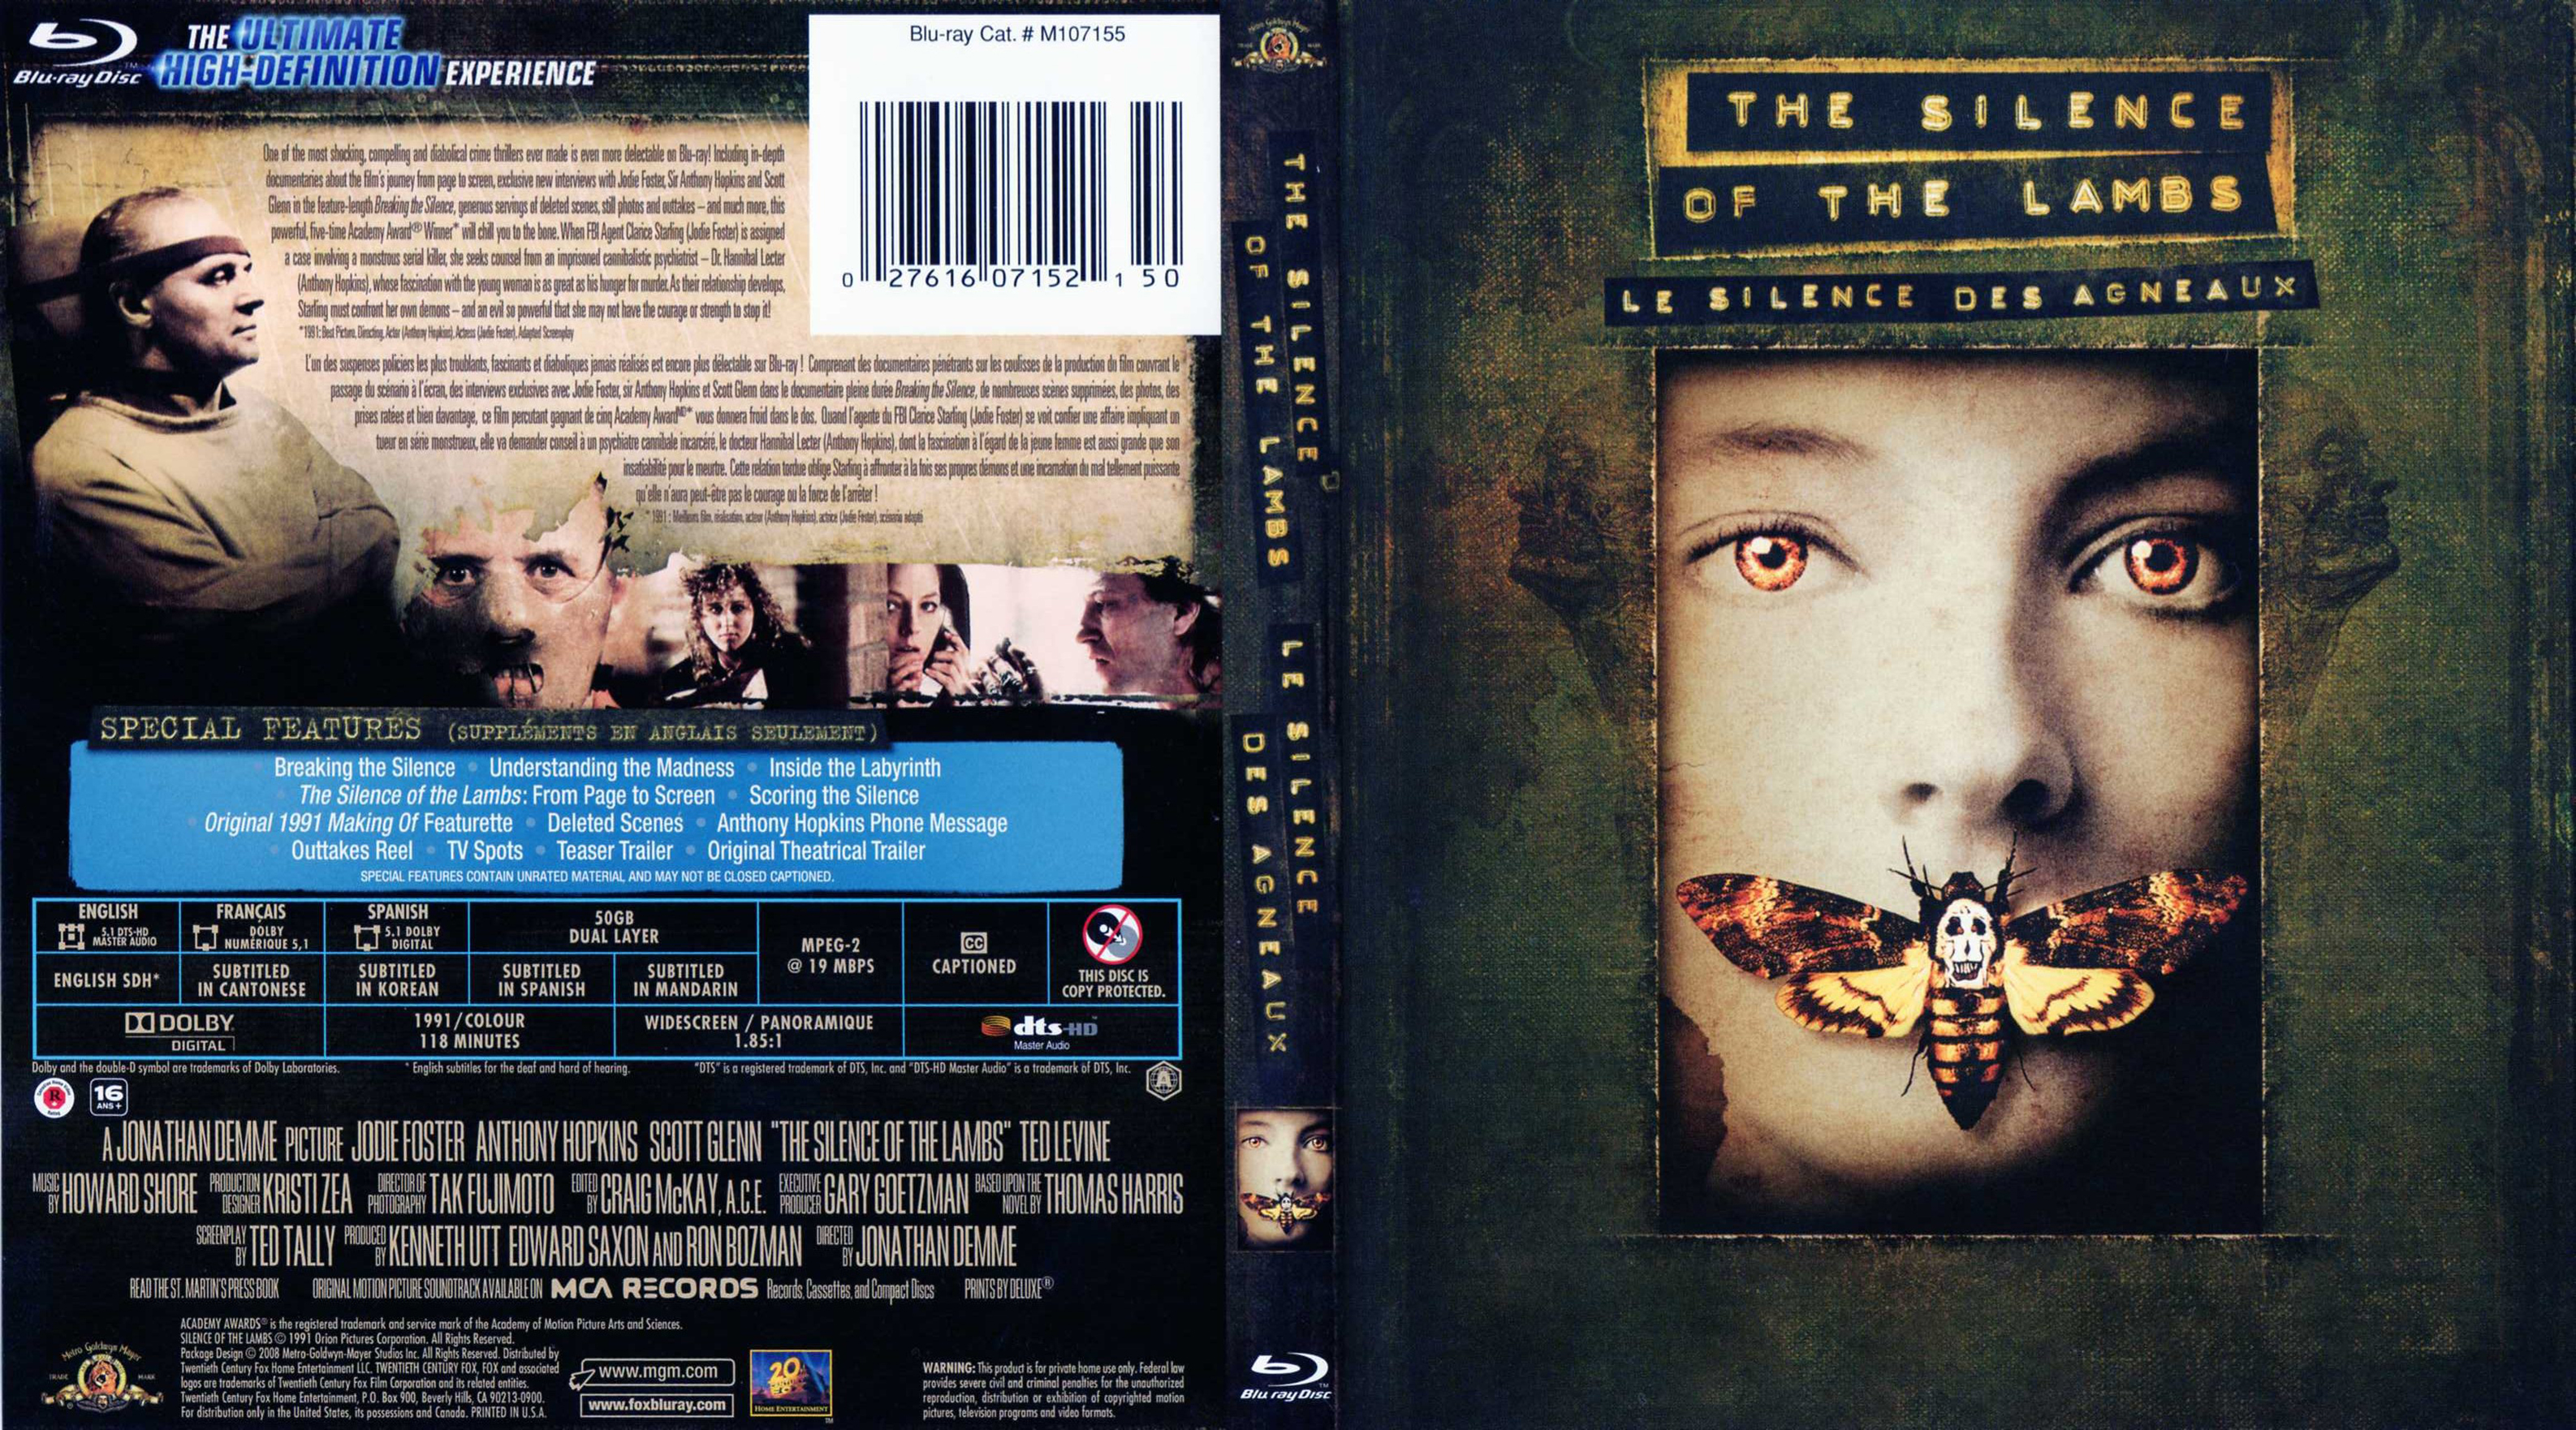 Jaquette DVD The silence of the lambs - Le silence des agneaux (Canadienne) (BLU-RAY)